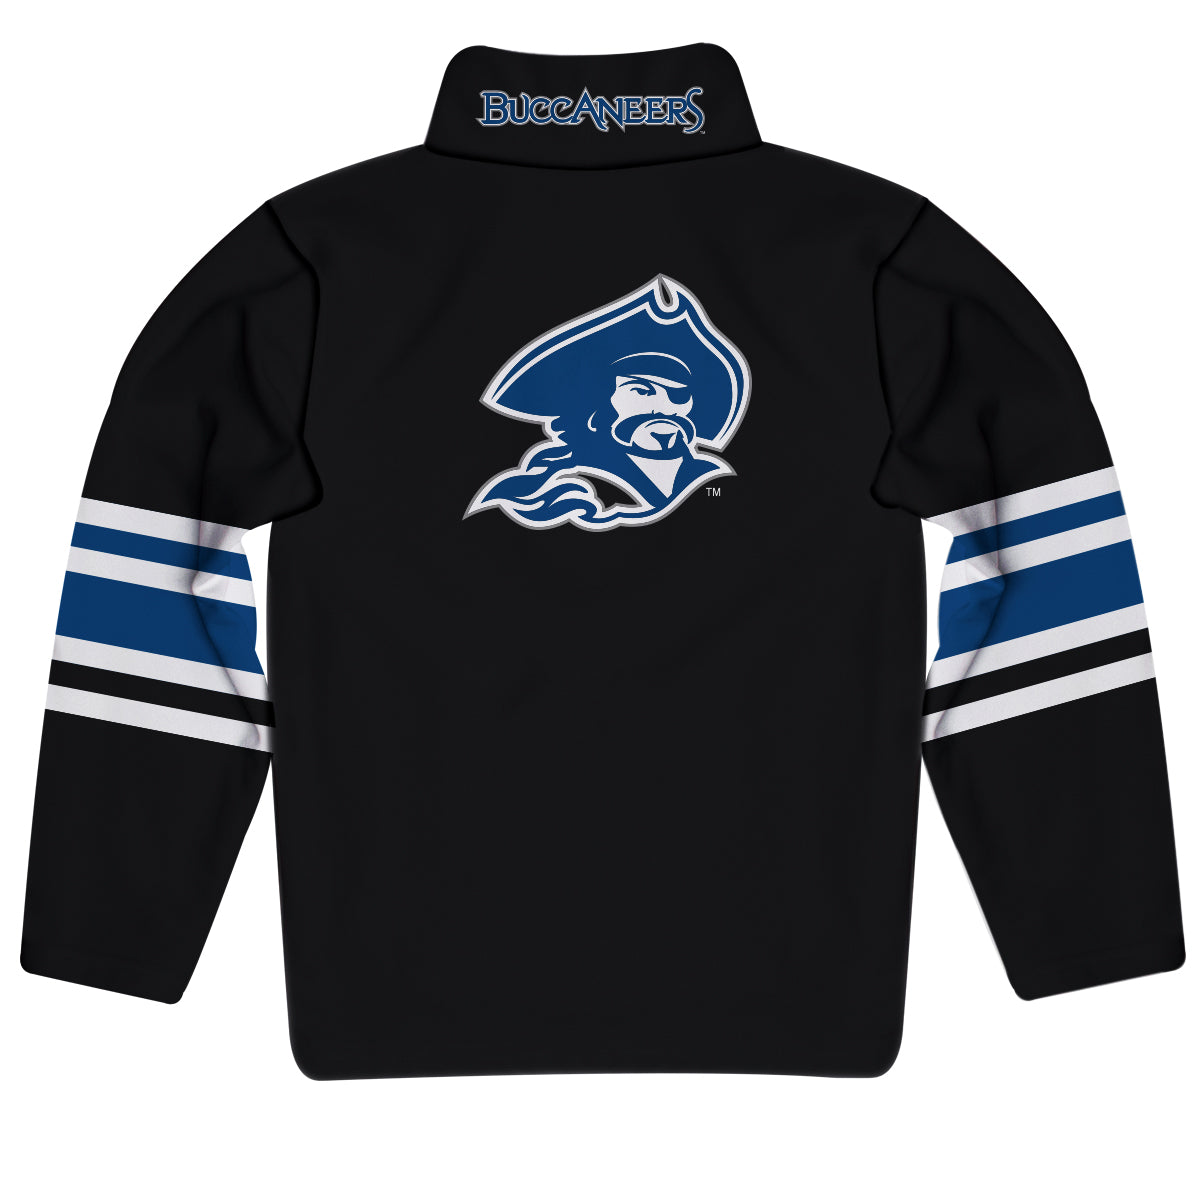 Blinn College Buccaneers Game Day Black Quarter Zip Pullover for Infants Toddlers by Vive La Fete